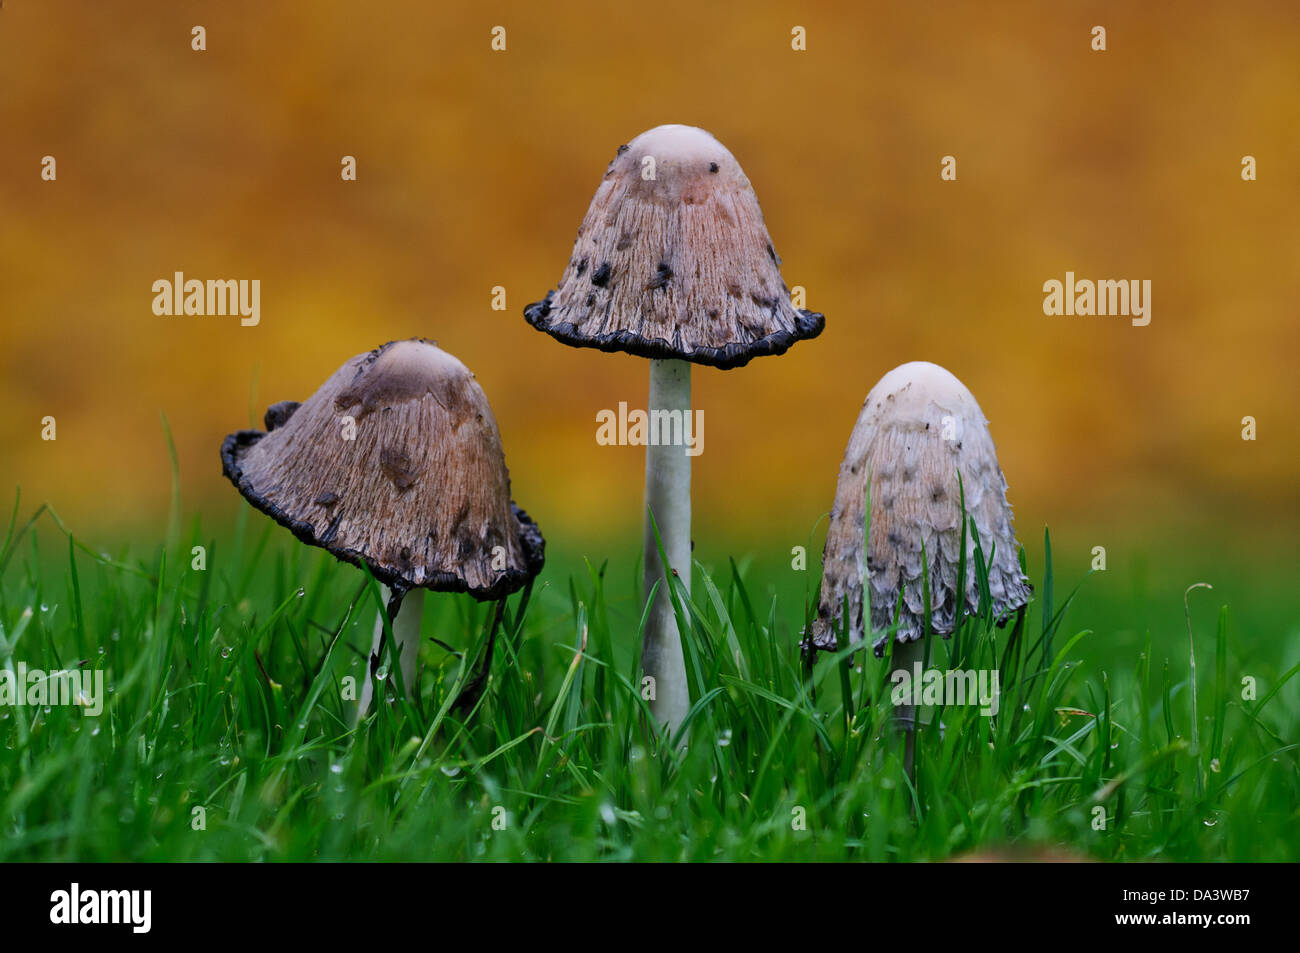 A group of three shaggy Inkcaps, aka lawyer's wigs, (Coprinus comatus) with their caps begining the process of liquefaction Stock Photo